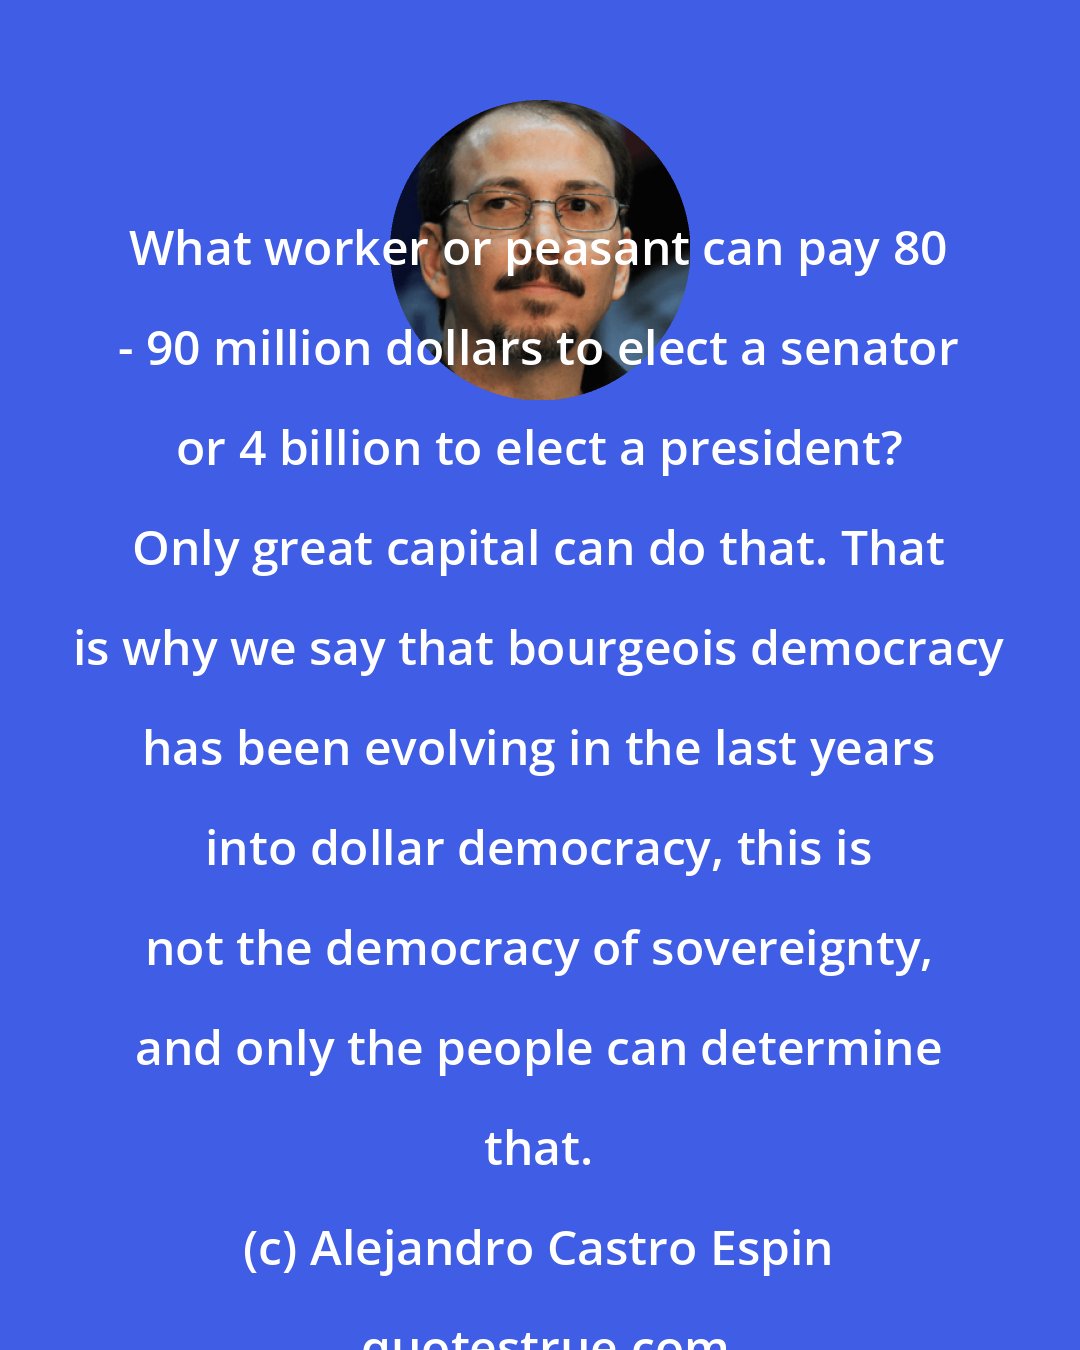 Alejandro Castro Espin: What worker or peasant can pay 80 - 90 million dollars to elect a senator or 4 billion to elect a president? Only great capital can do that. That is why we say that bourgeois democracy has been evolving in the last years into dollar democracy, this is not the democracy of sovereignty, and only the people can determine that.